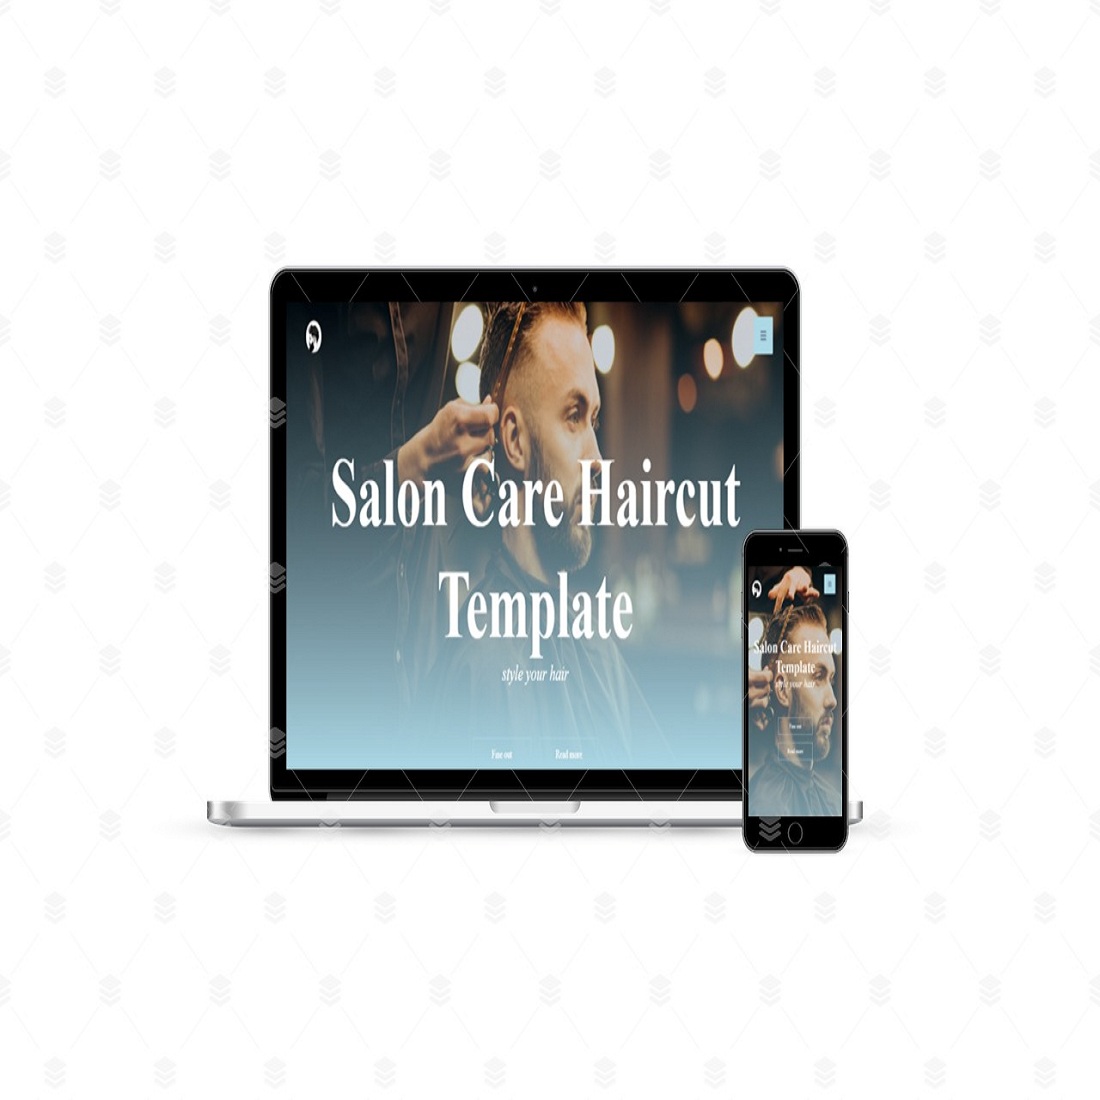 HTML5 Responsive salon care Haircut Template preview image.